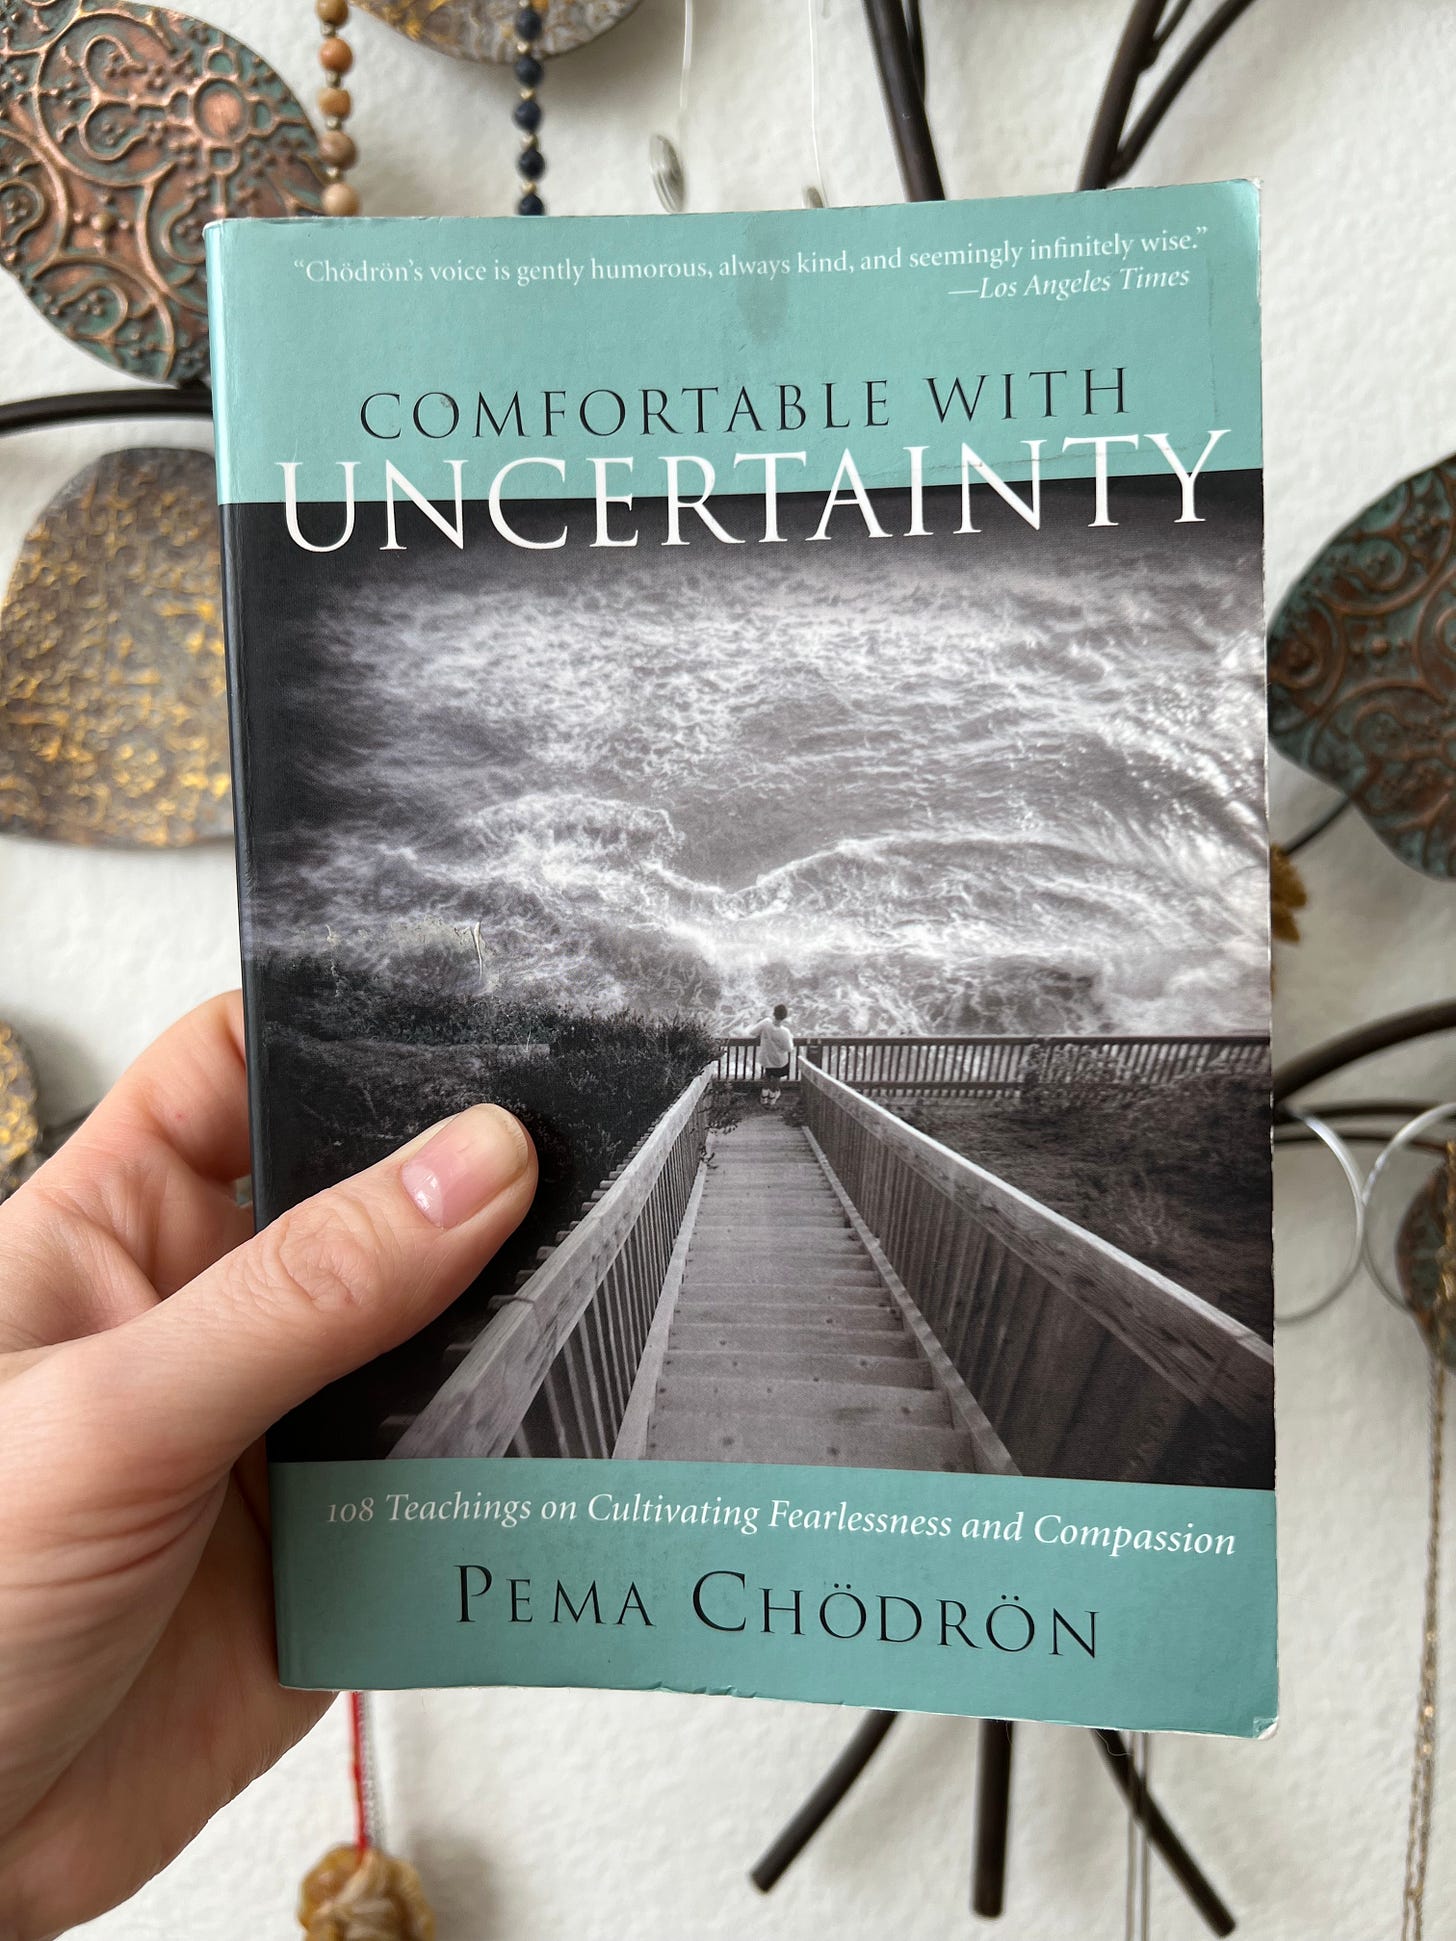 Erin holds a copy of Comfortable with Uncertainty by Pema Chodron